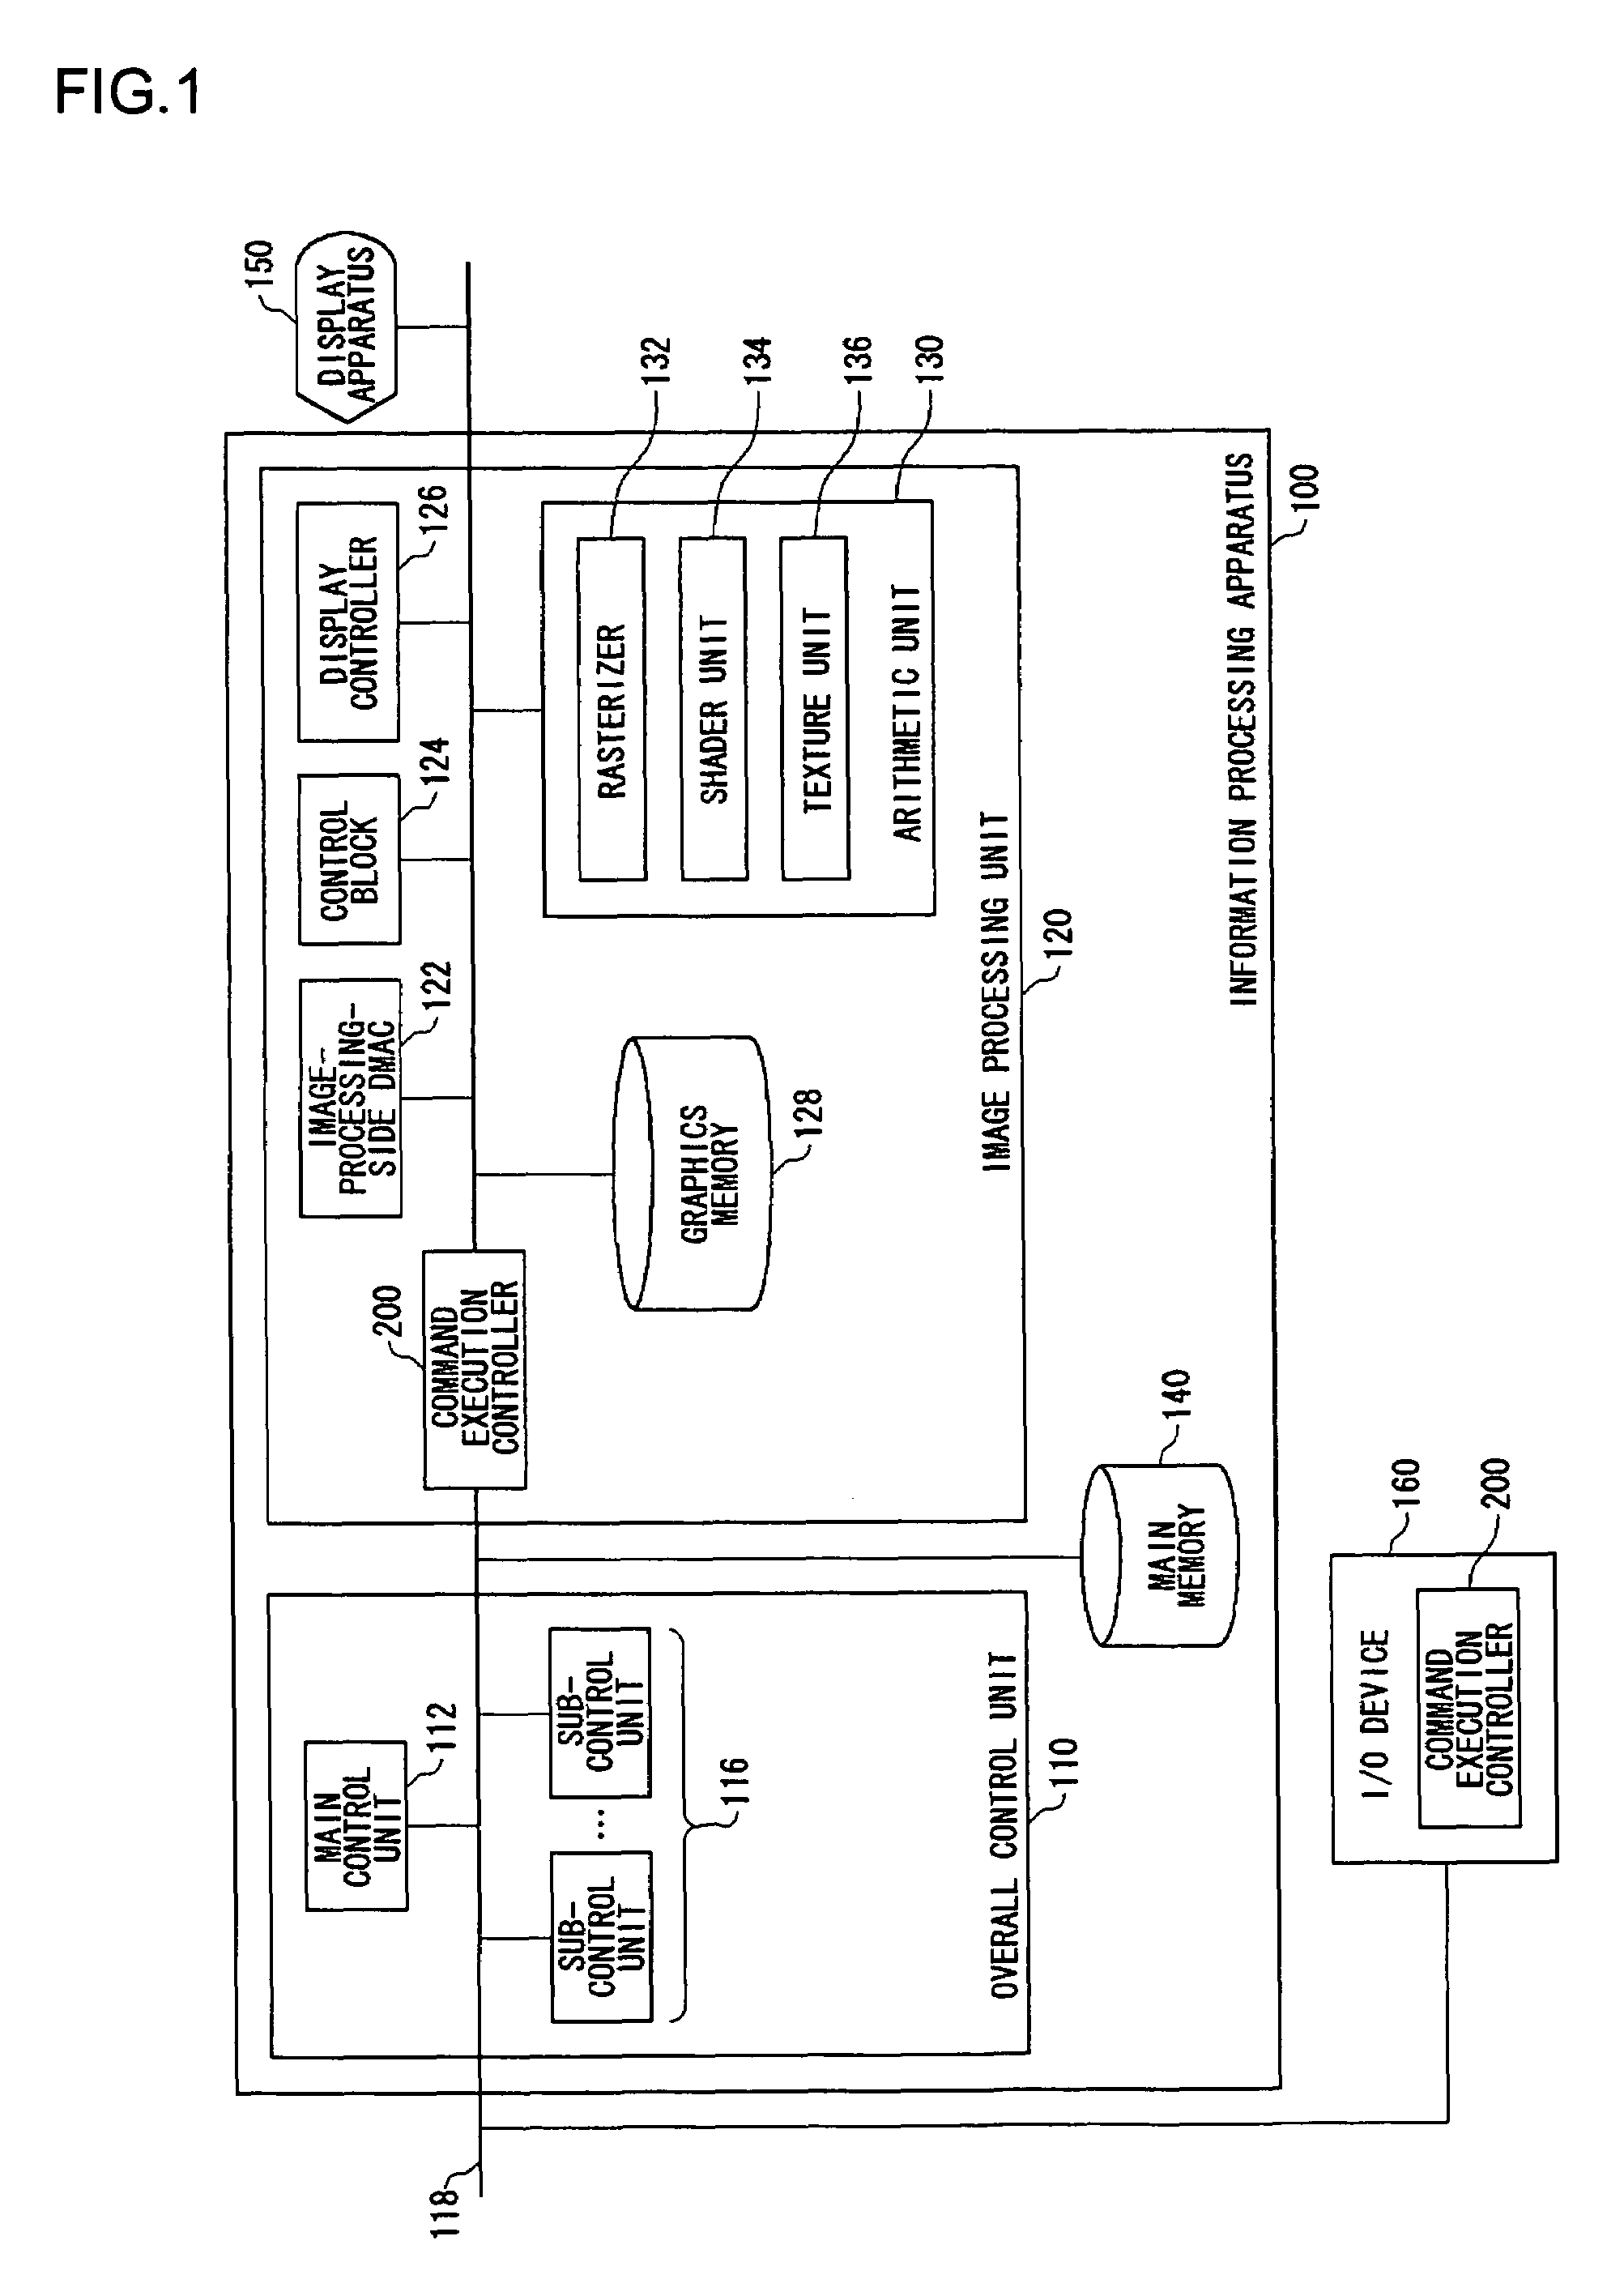 Command execution controlling apparatus, command execution instructing apparatus and command execution controlling method